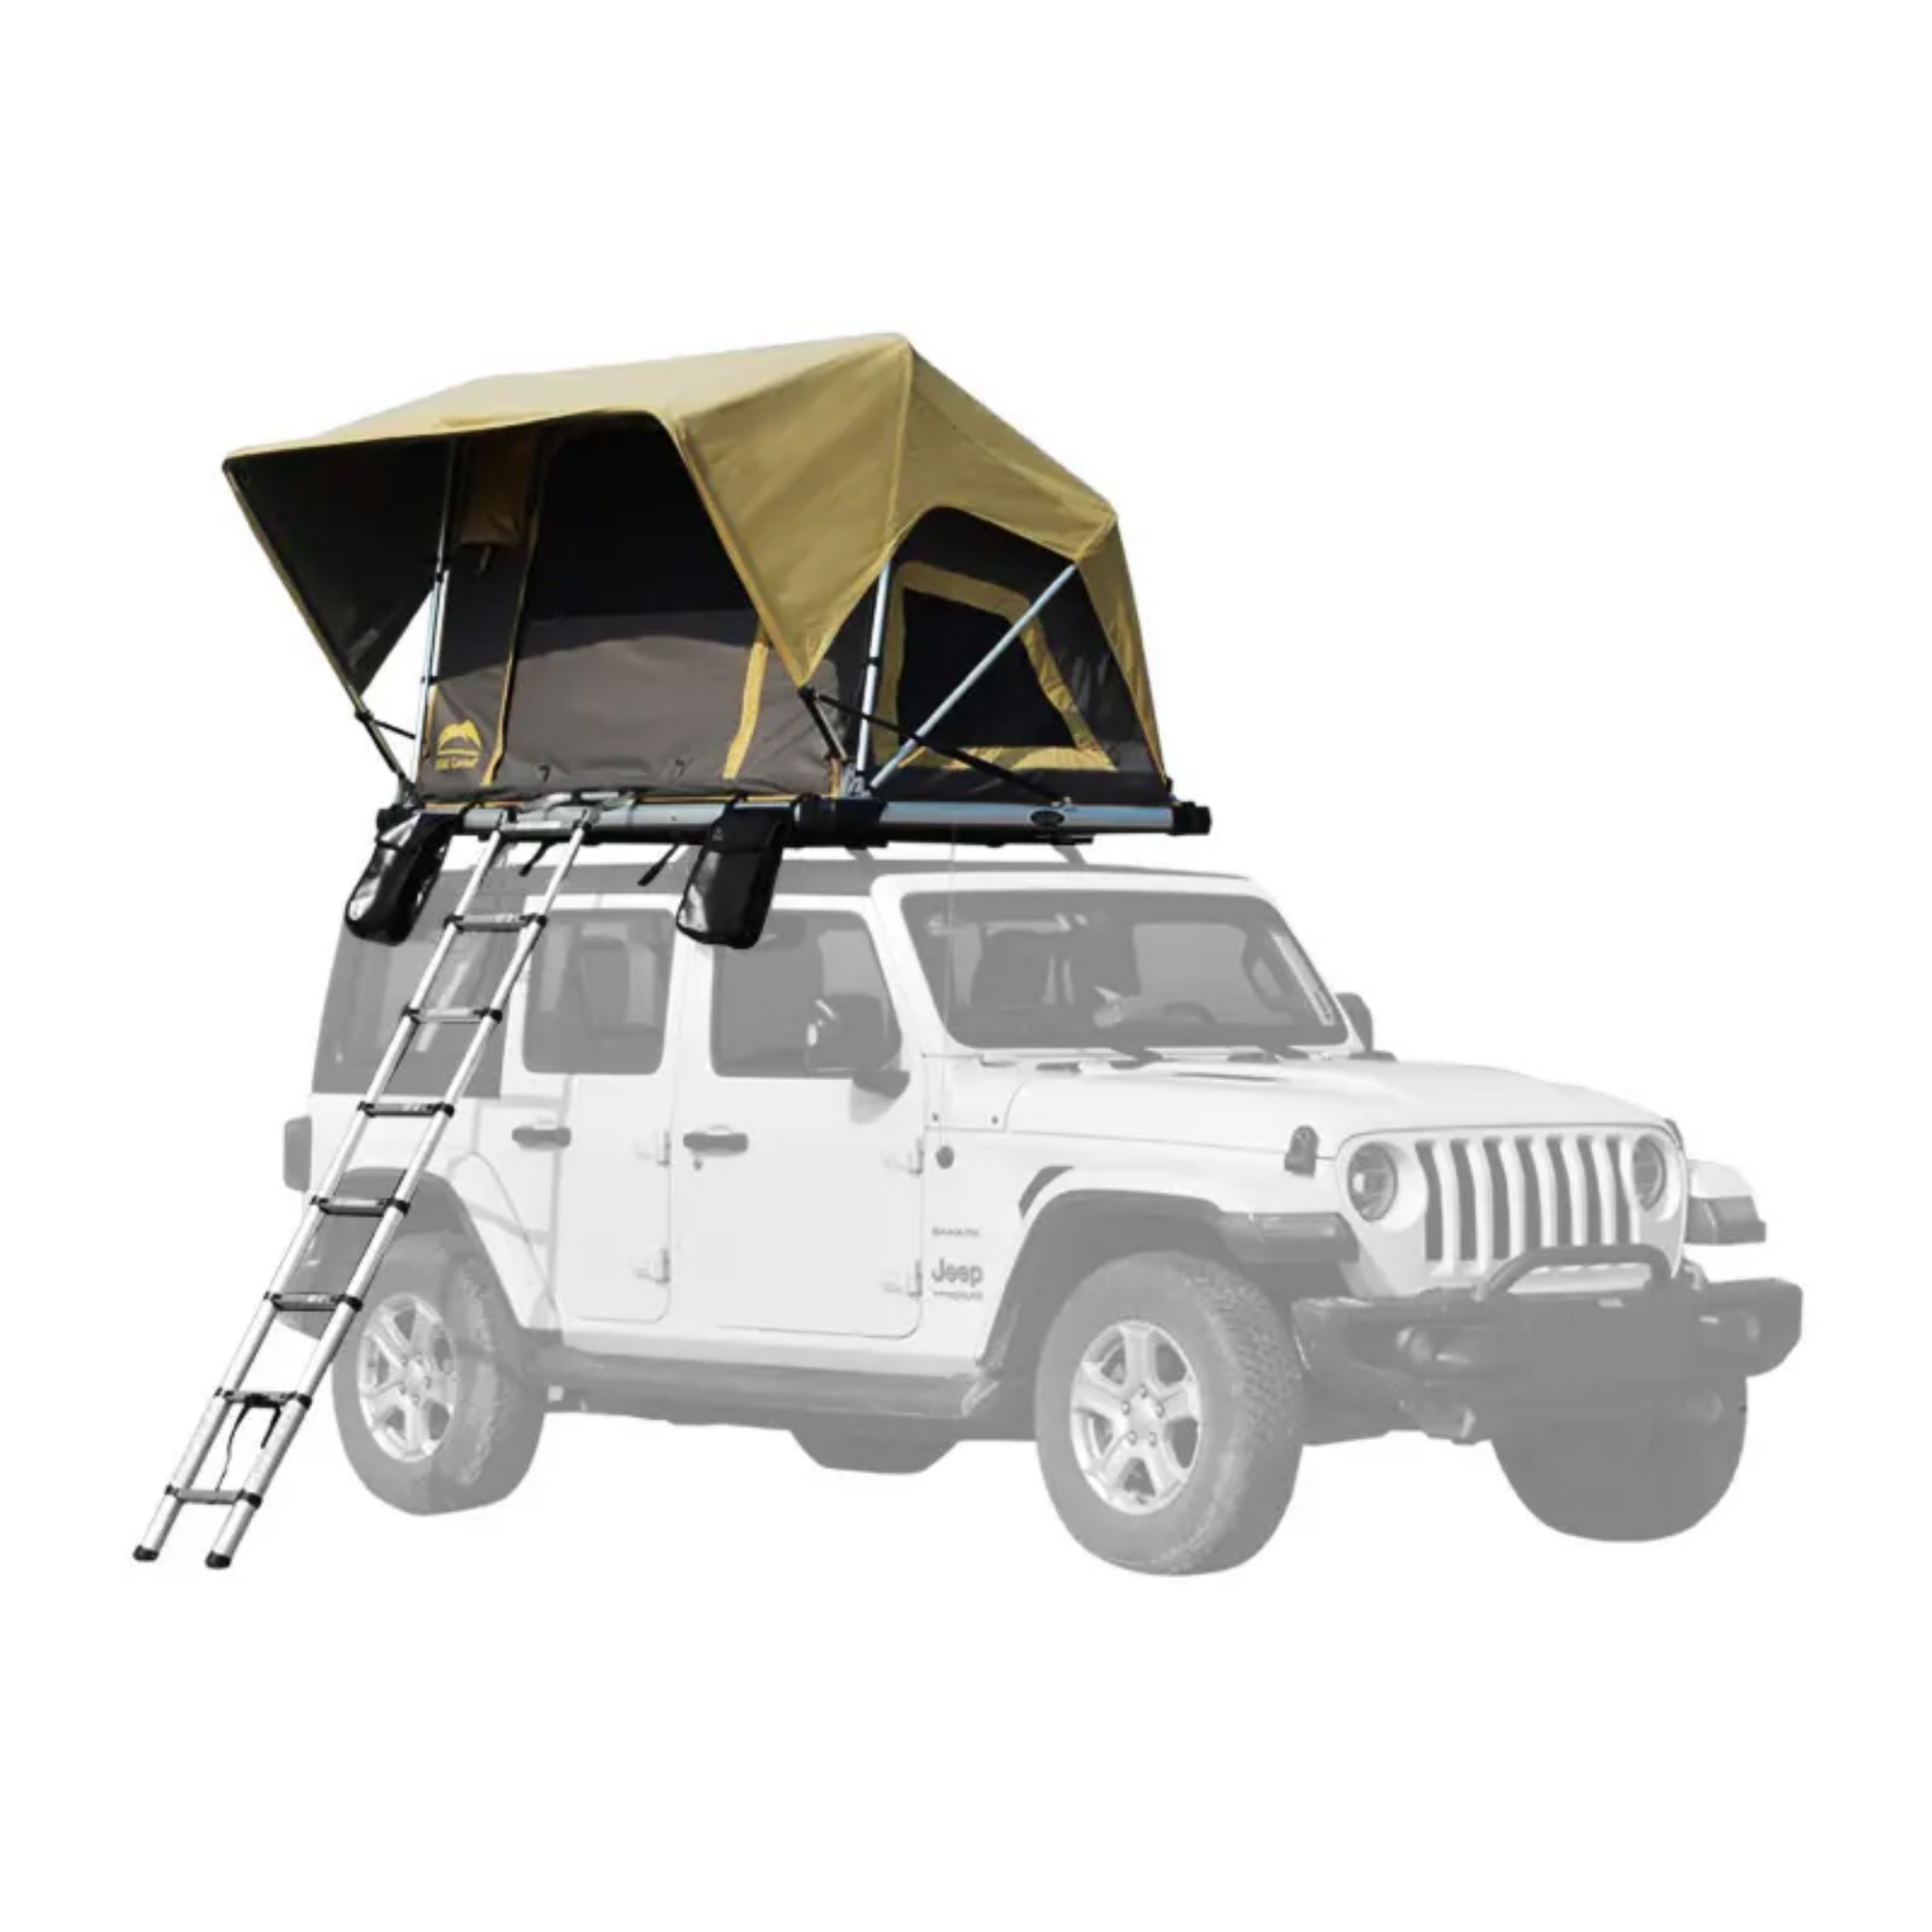 SALE! Wildland Normandy Auto 120 Soft Shell Roof Tent